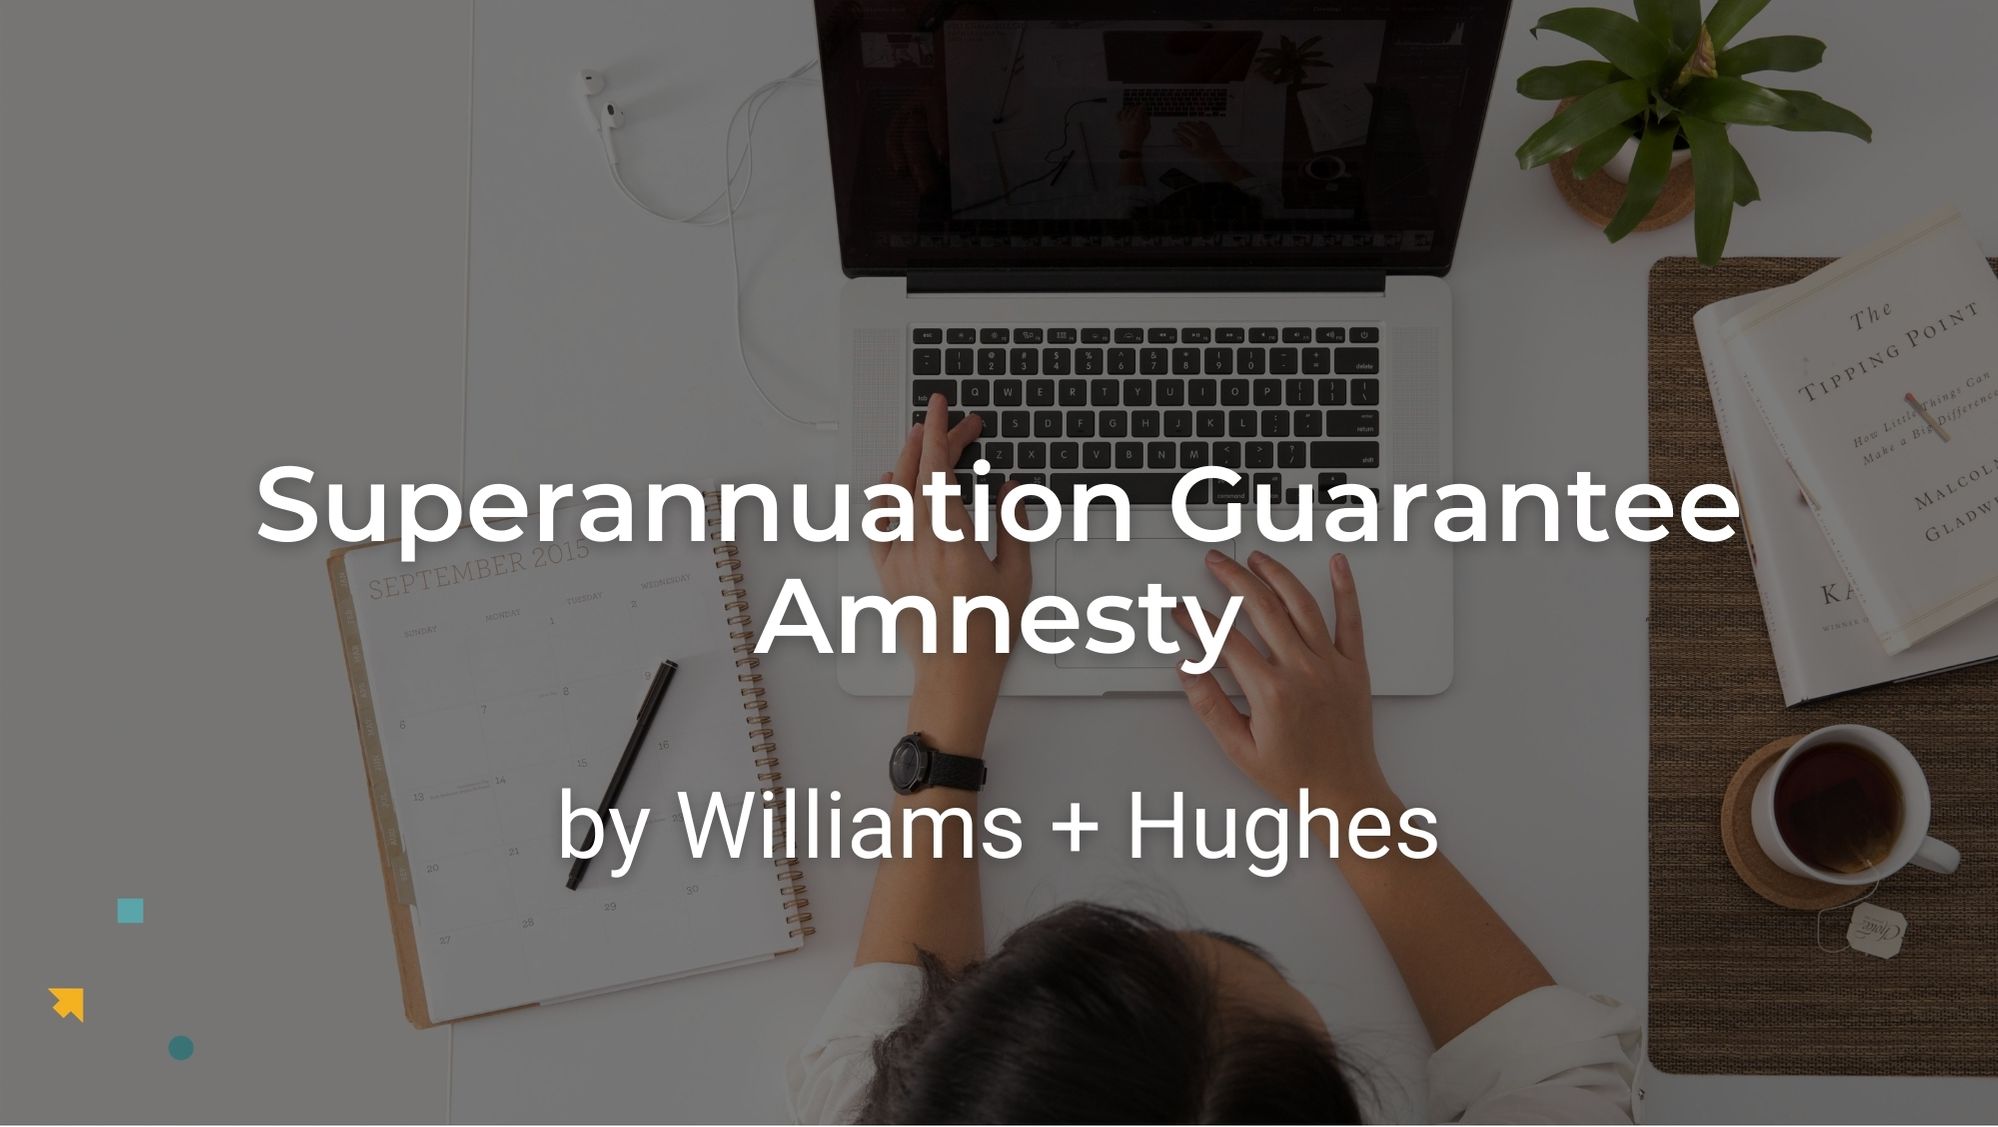 Superannuation Guarantee Amnesty: one last chance to pay compulsory superannuation for non-complying employers who employ “contractors”